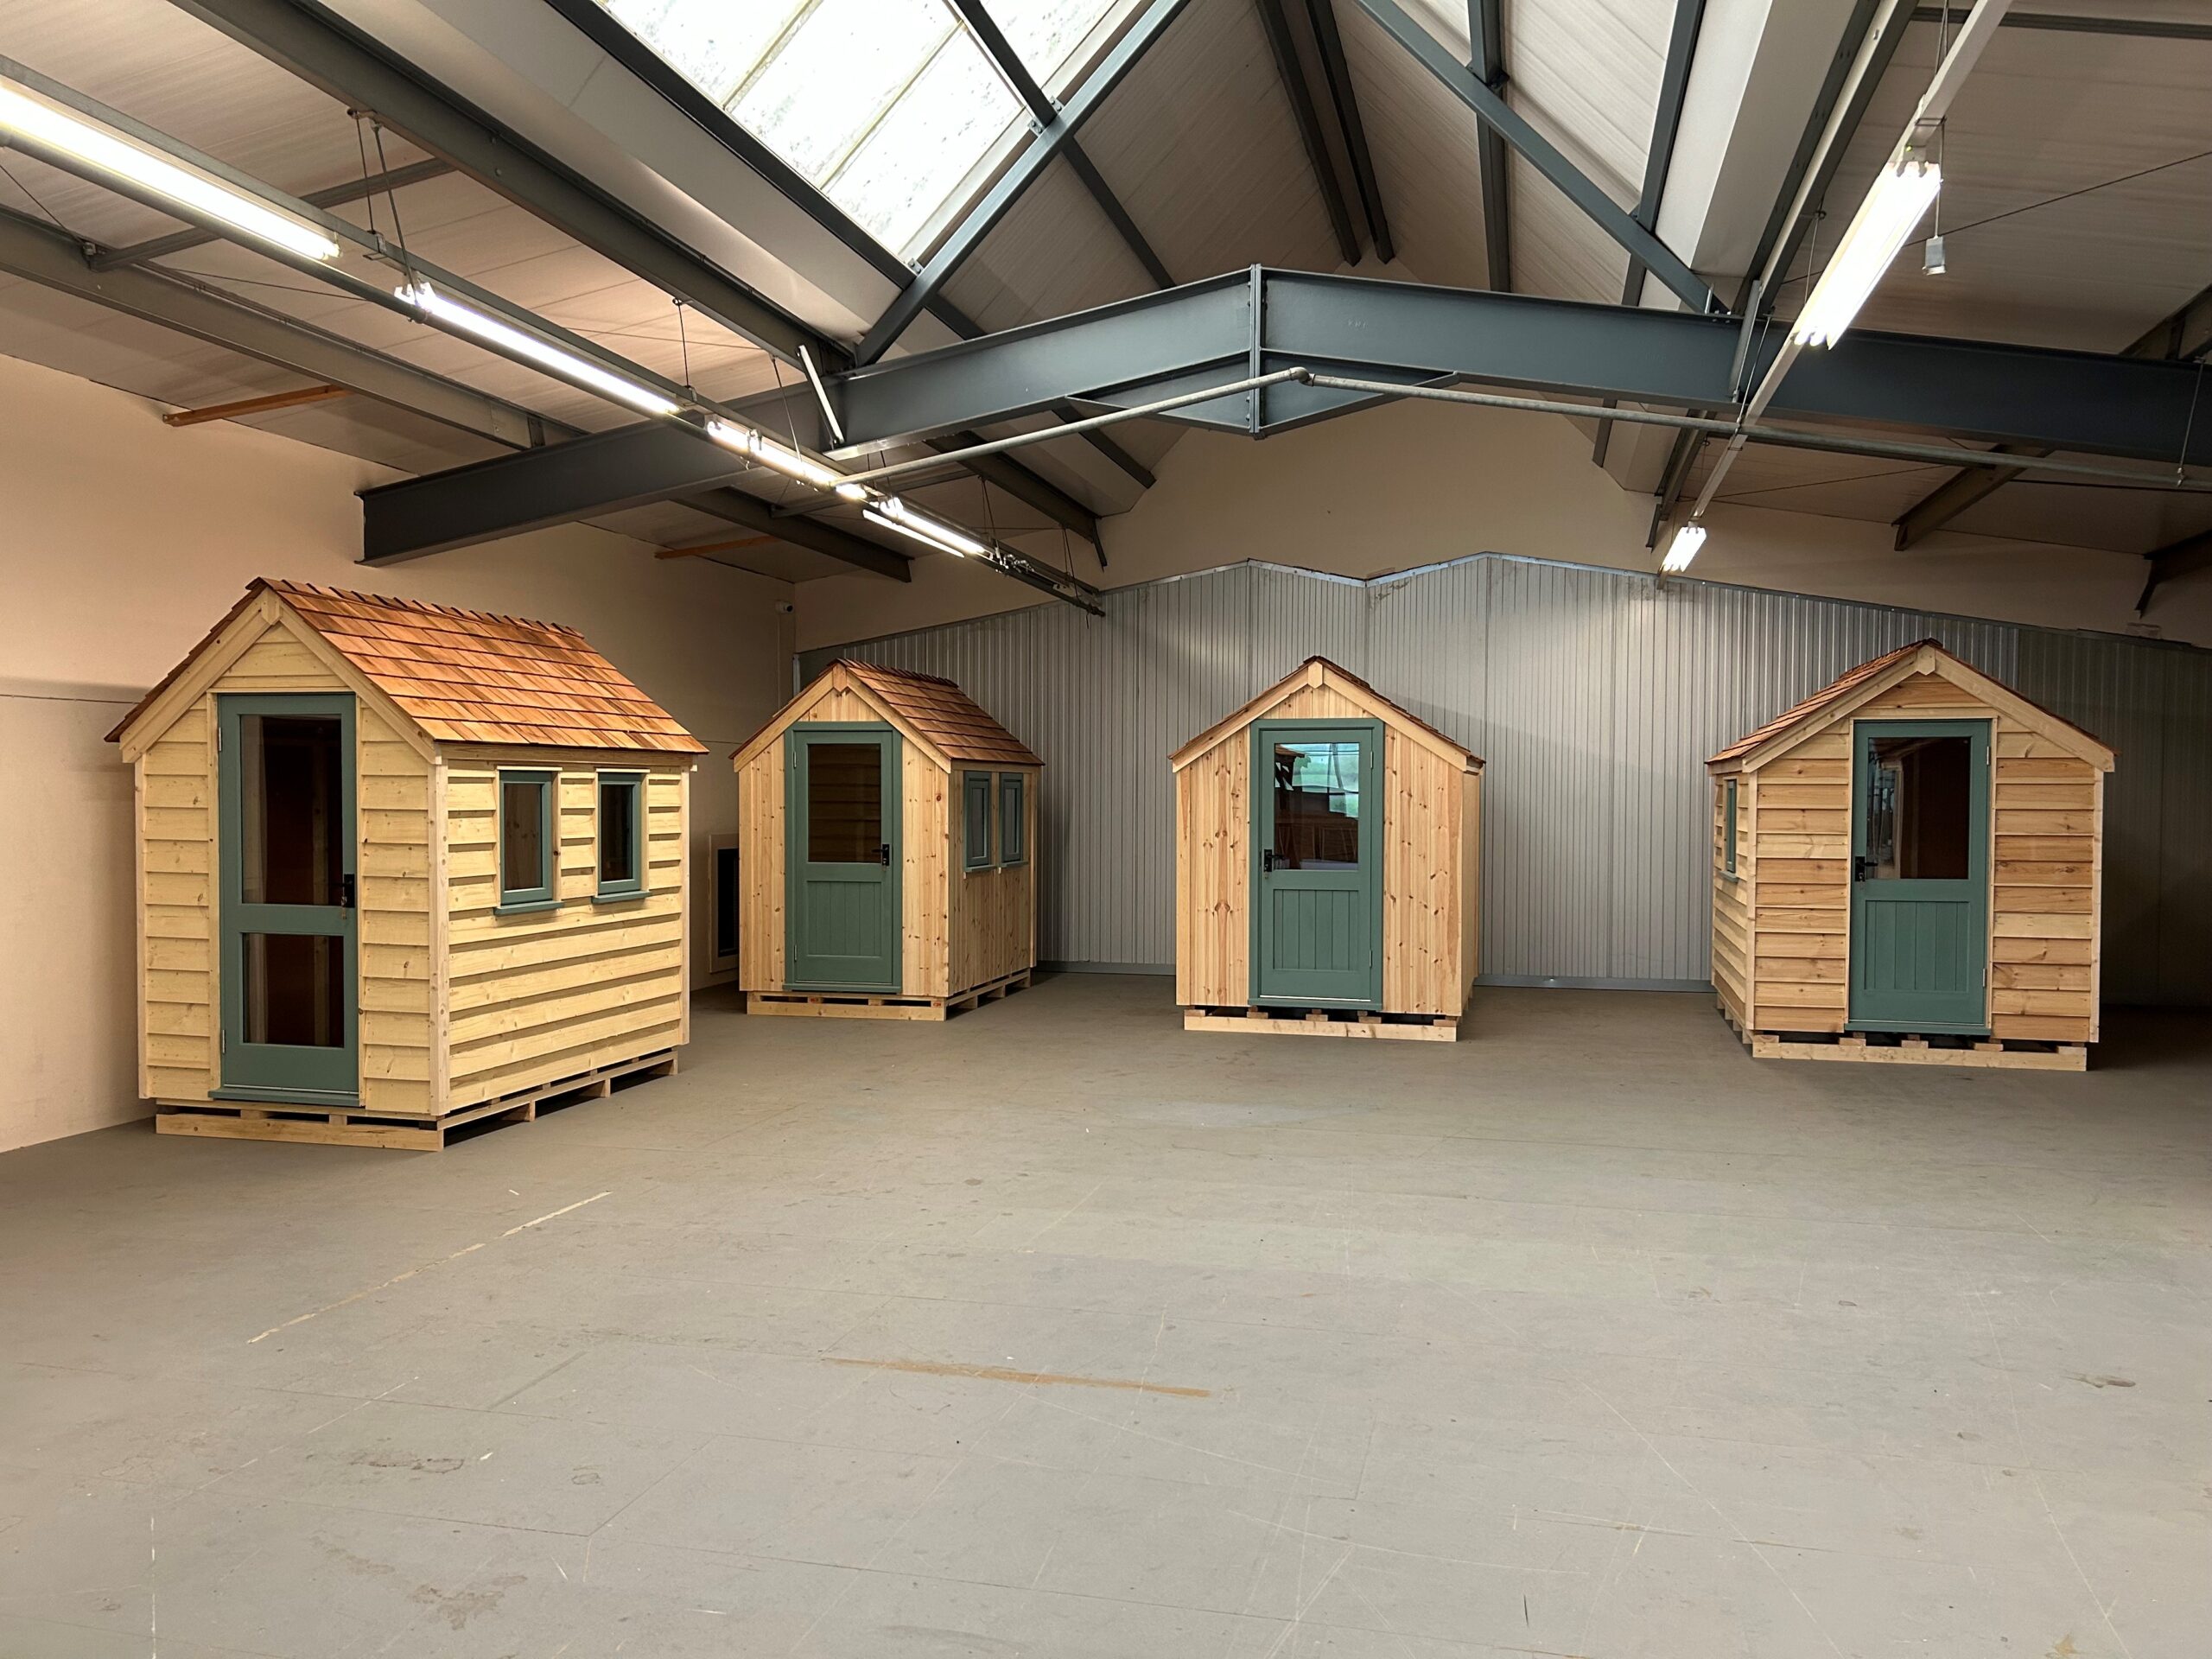 Luxury Garden Sheds In The Radnor Timber Buildings Showroom